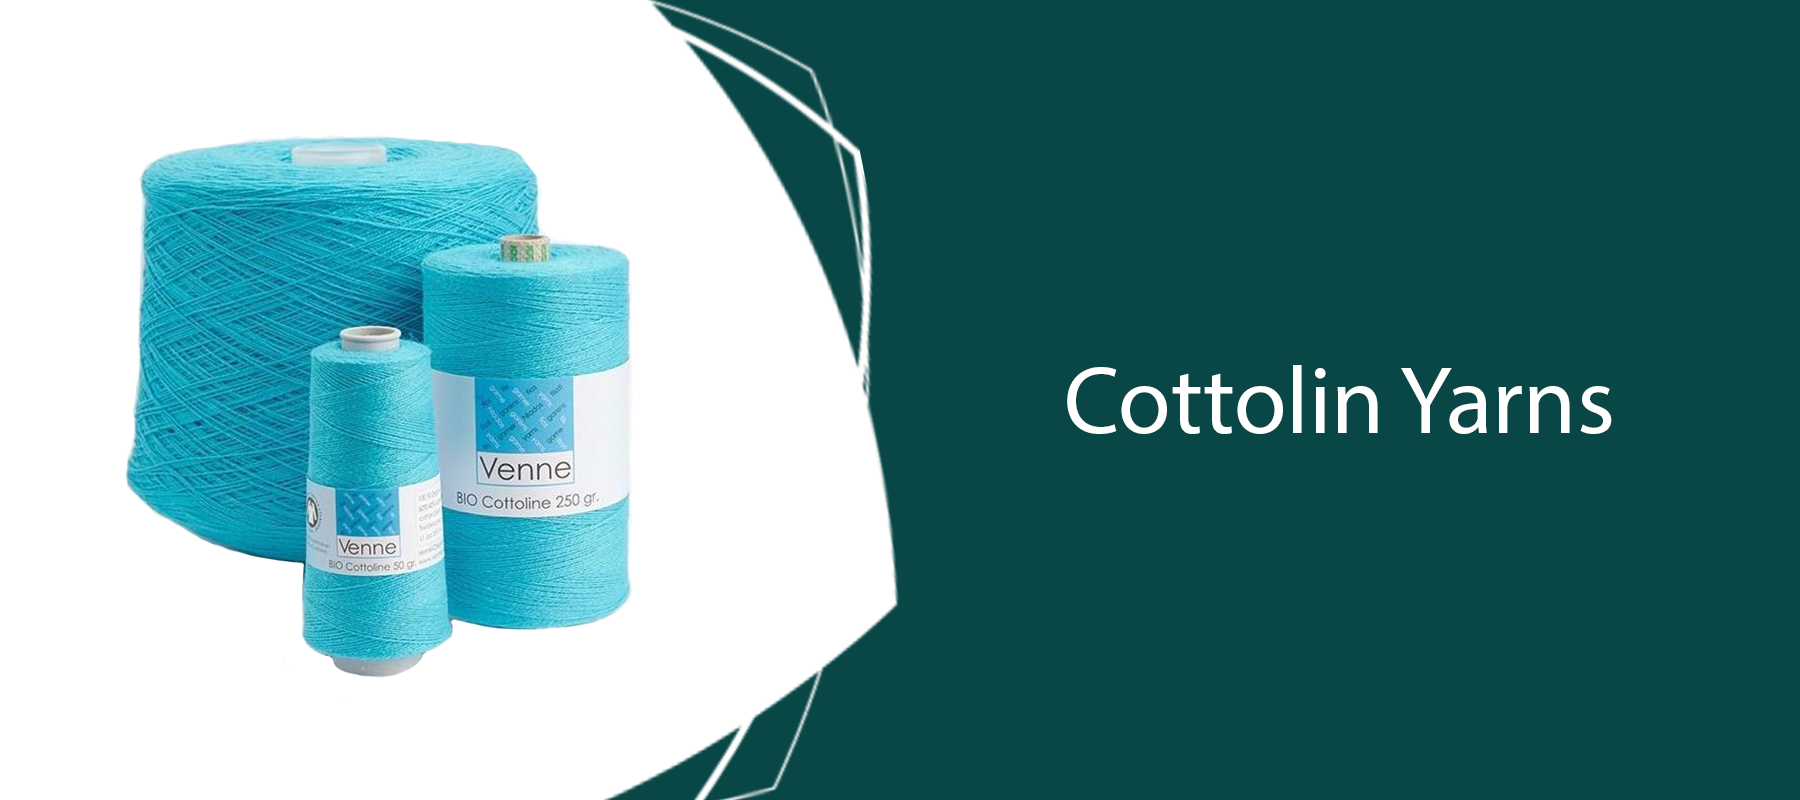 Cottolin Yarns Australia: A Perfect Cotton and Linen Blend